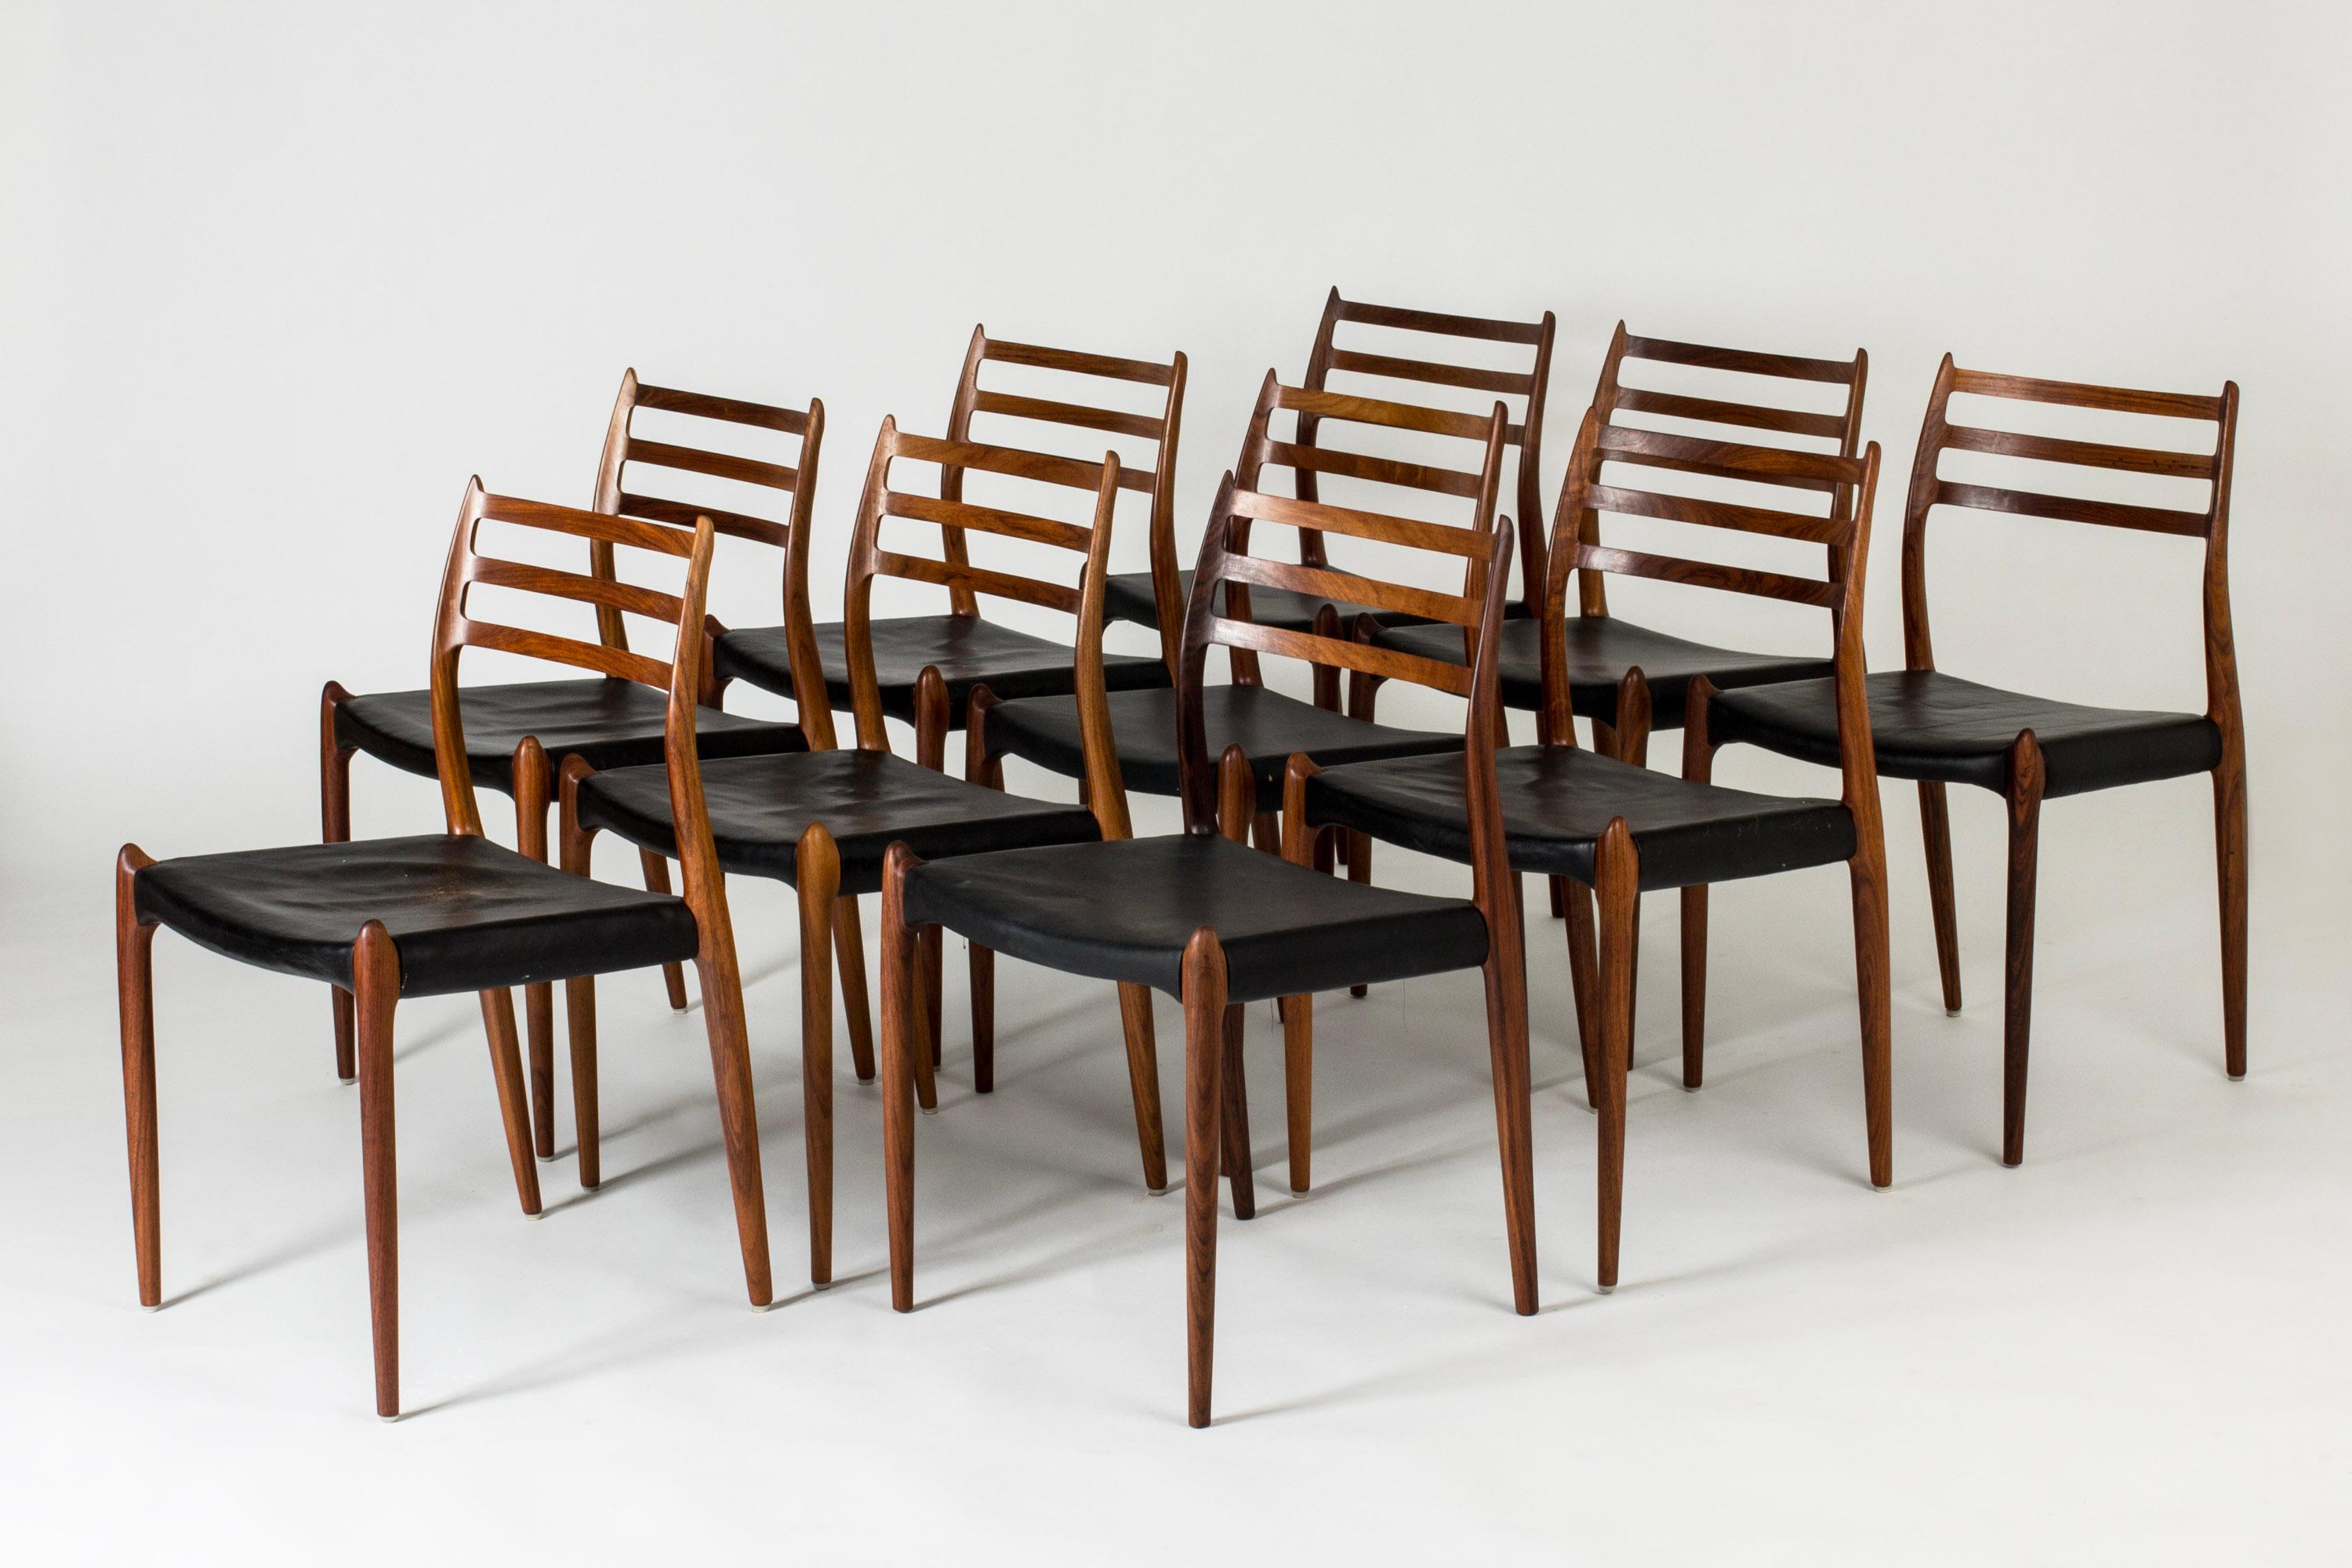 Set of ten gorgeous rosewood dining chairs by Niels O. Møller. Vintage black leather seats. The fluency of the design and the hornlike details at the seats and on the backrests give these chairs a breathtaking grace with daring undertones.